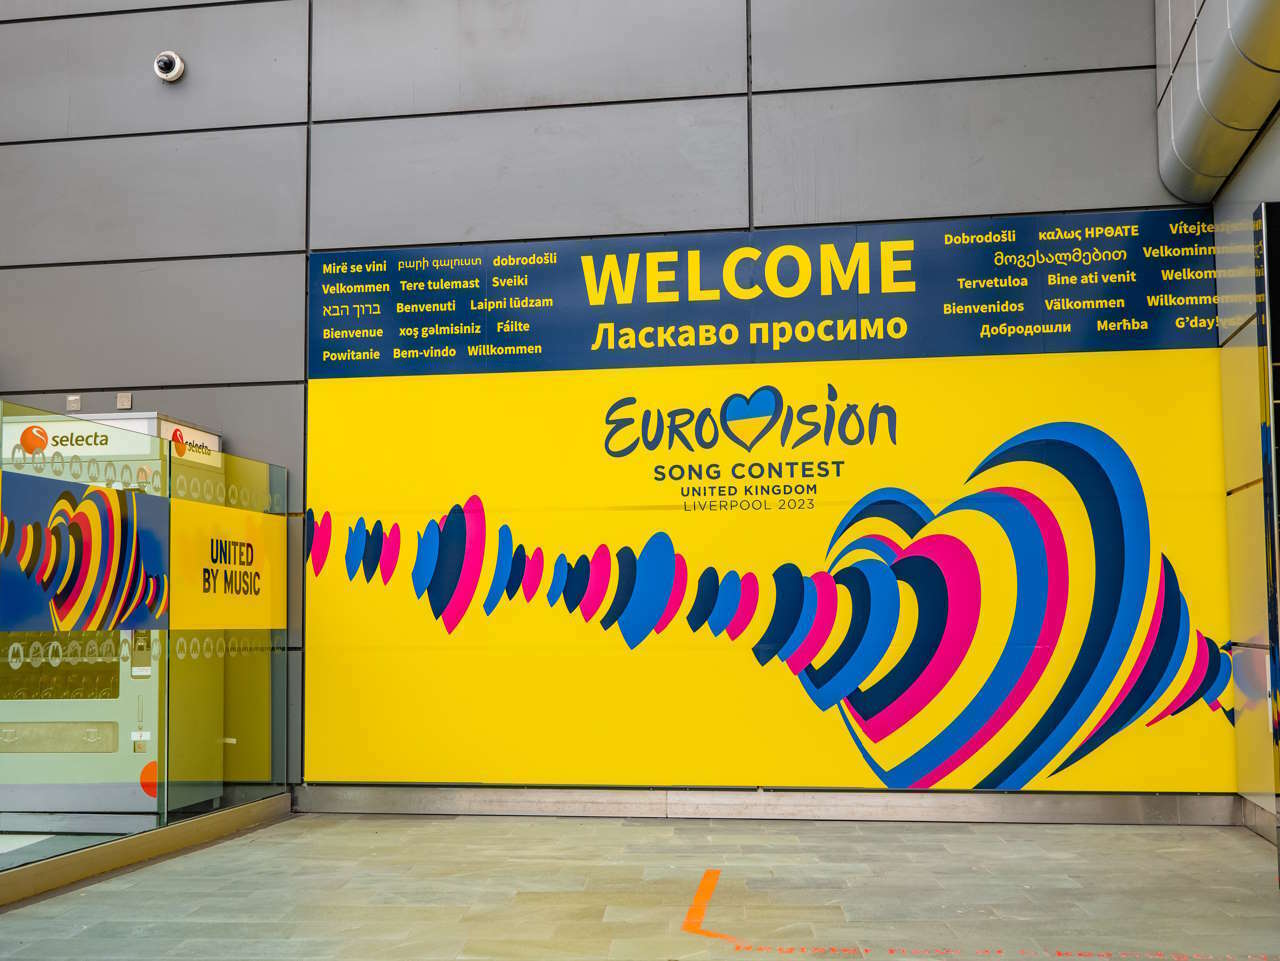 Merseyrail stations change names to celebrate Eurovision